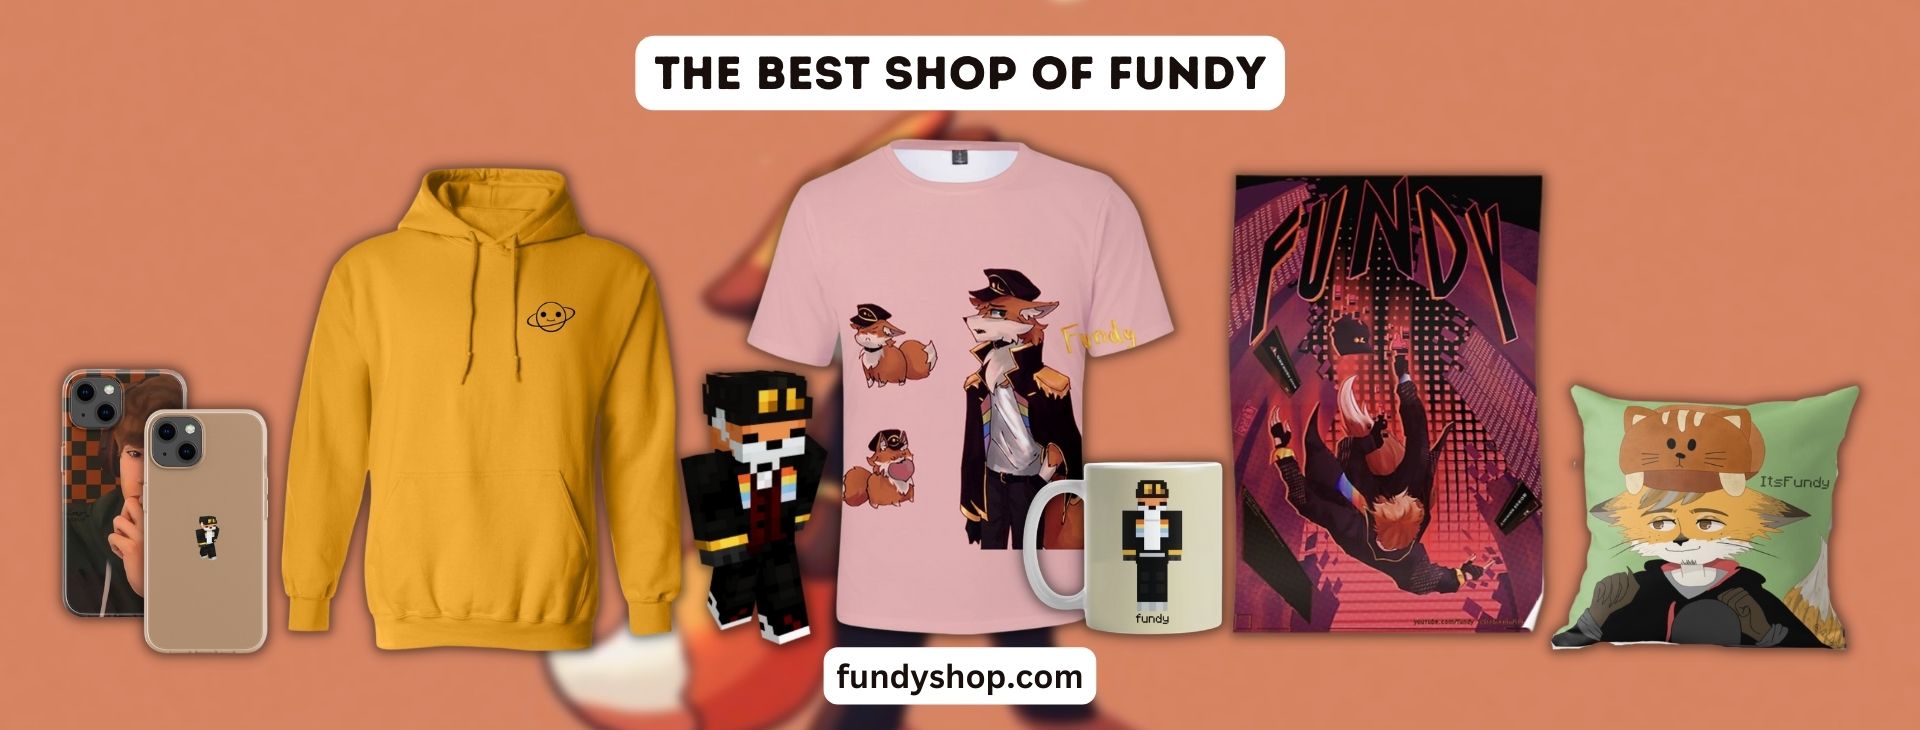 fundy Banner - Fundy Shop